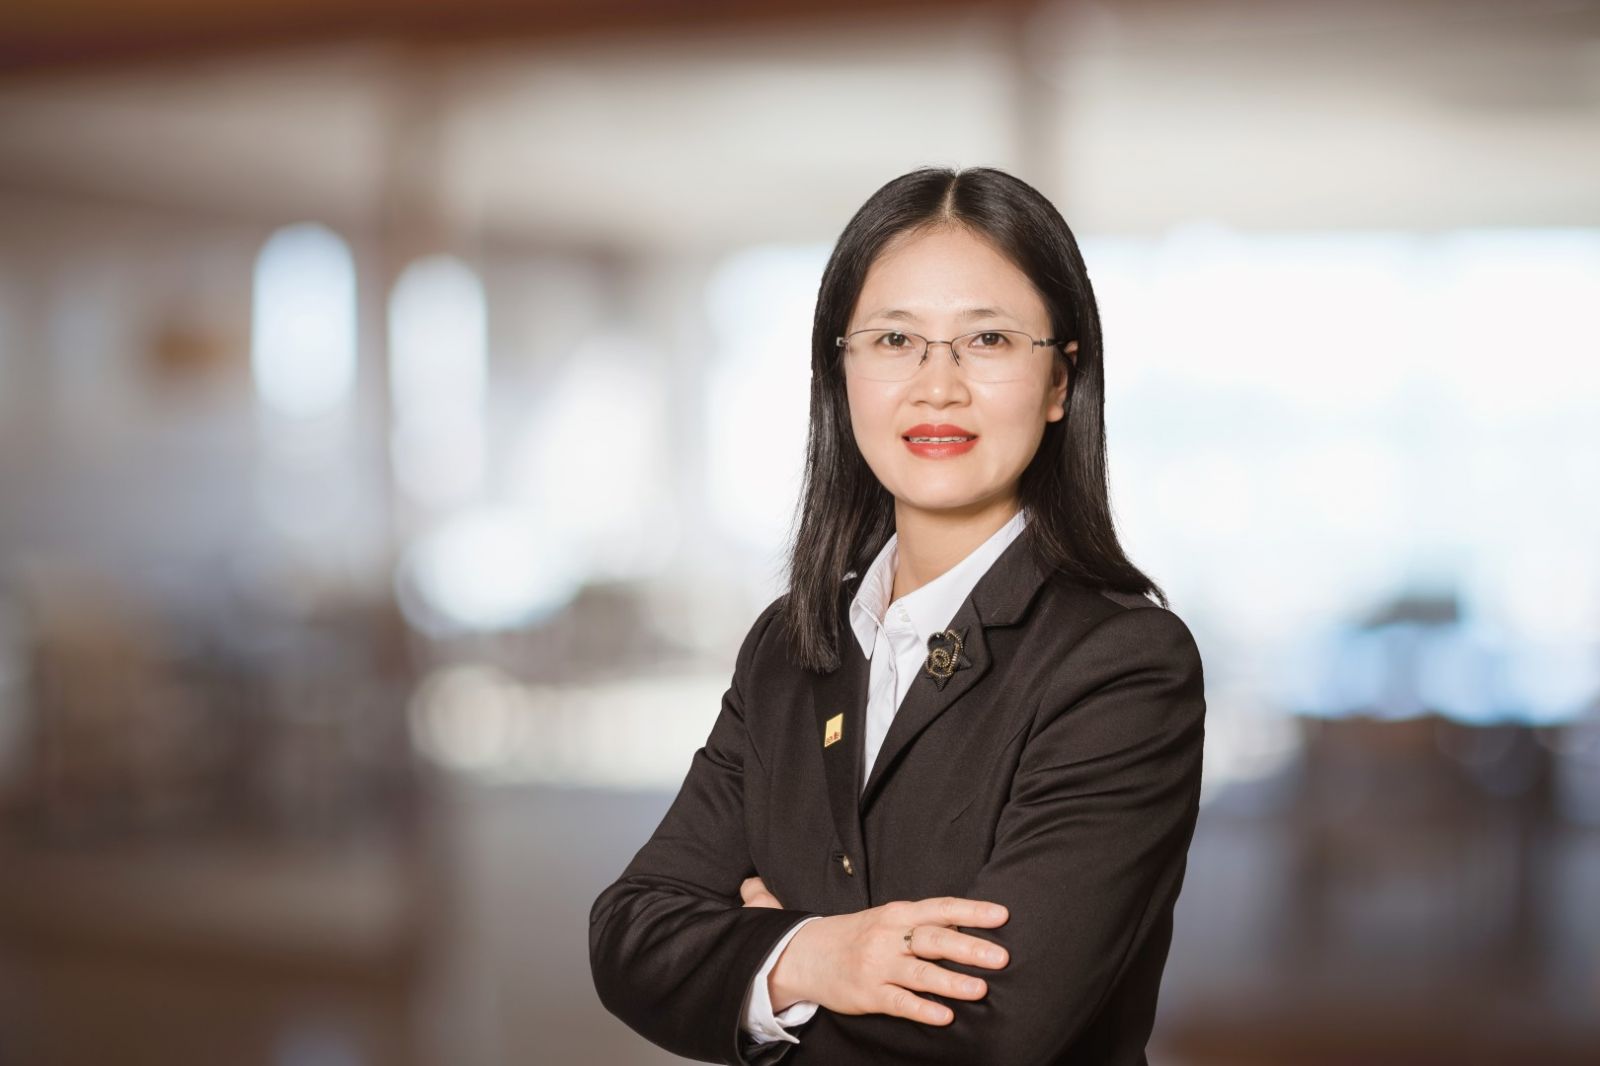 Ms Do Thi Thu Hang, Director of Research and Consulting at Savills, Hanoi.